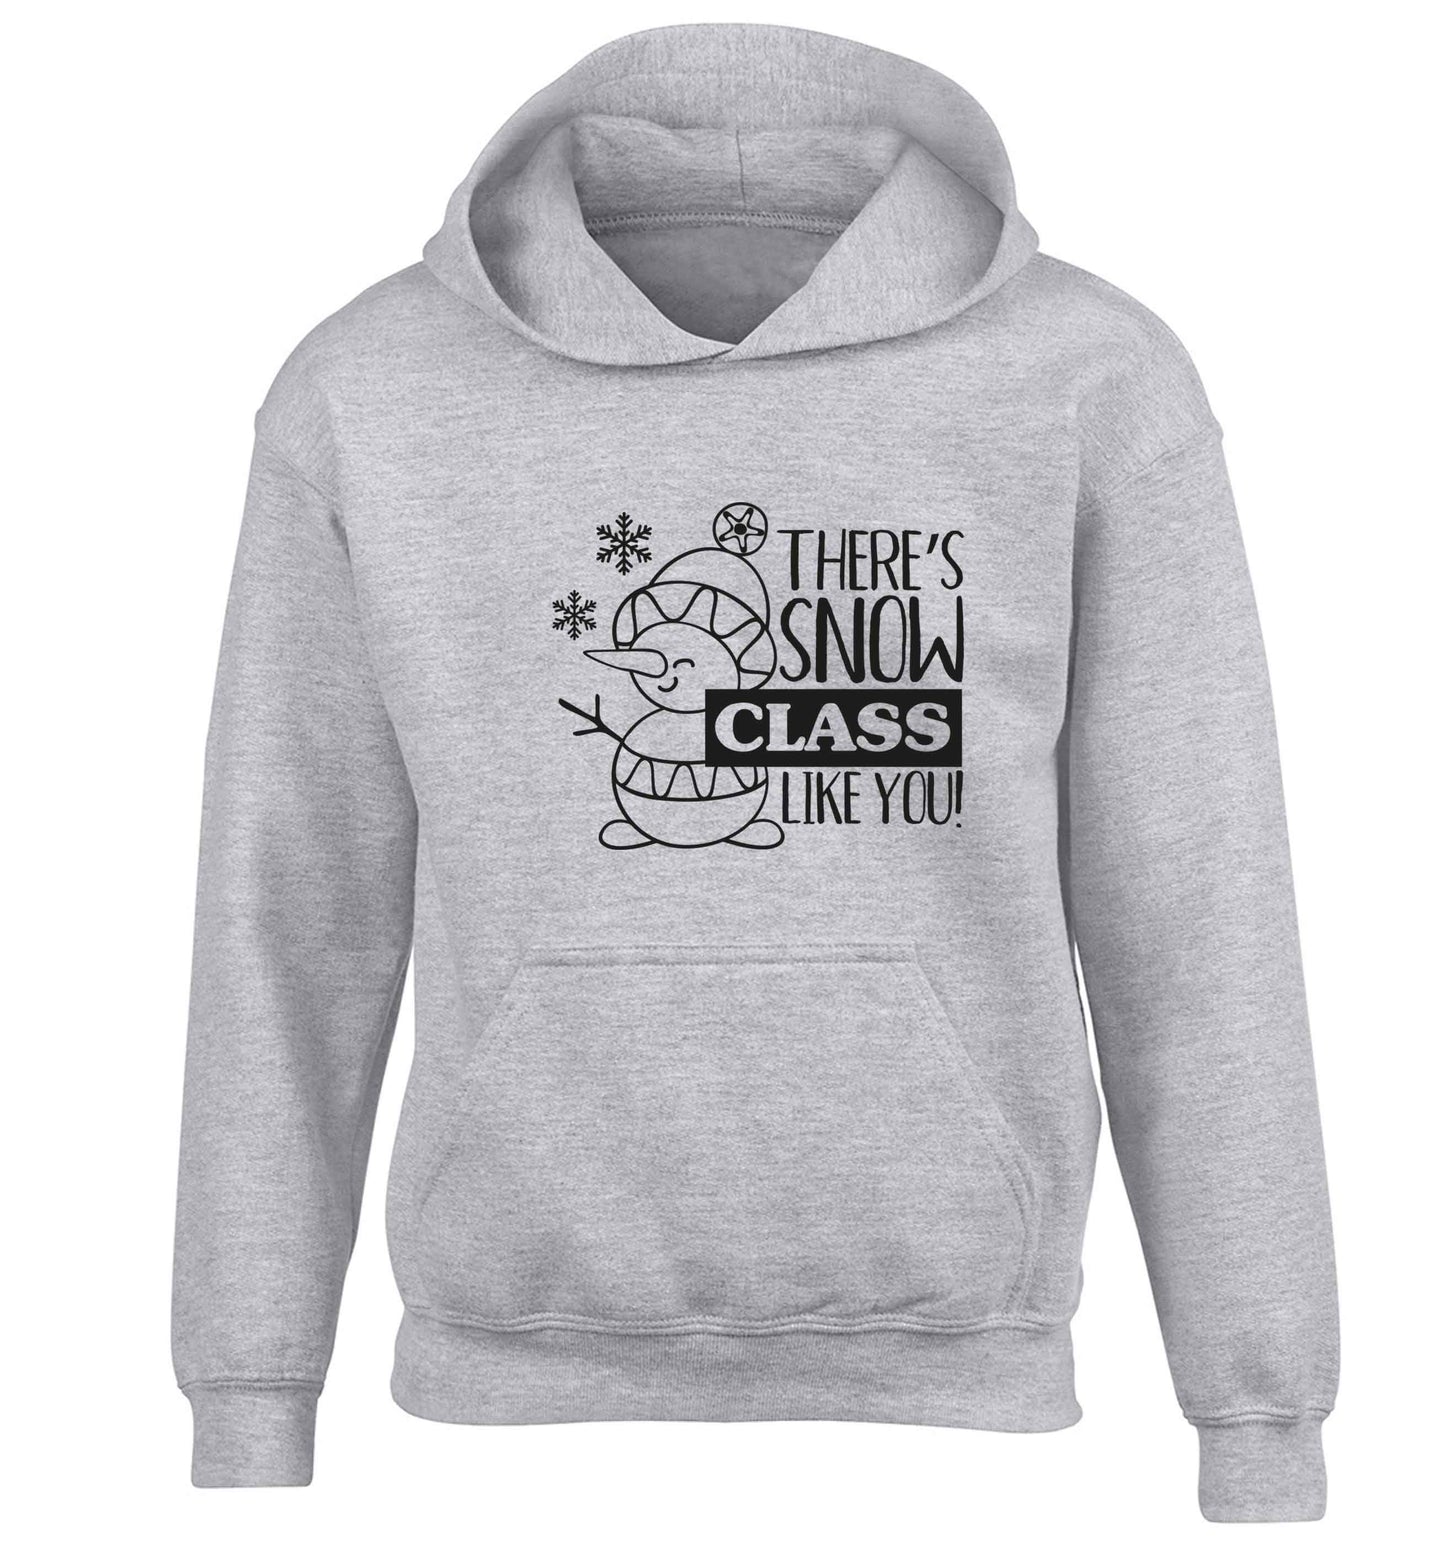 There's snow class like you children's grey hoodie 12-13 Years